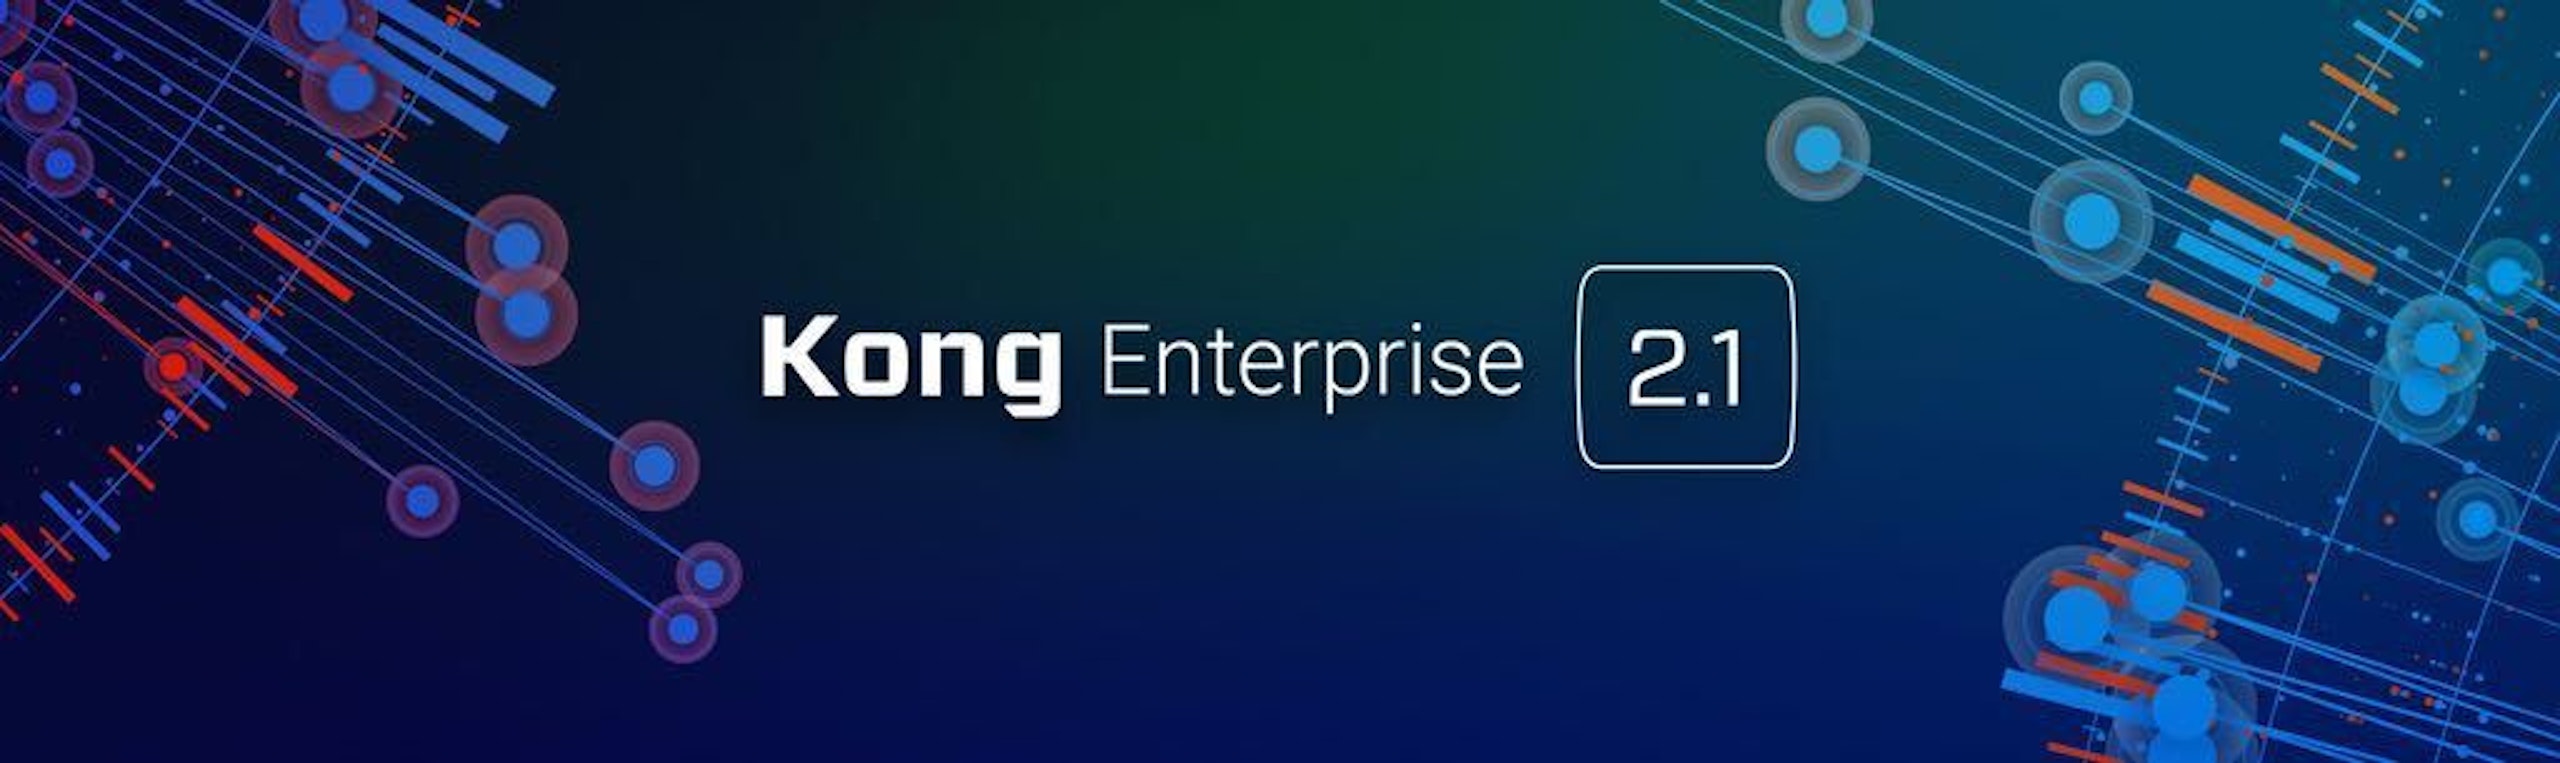 Kong Enterprise 2.1 Now Generally Available!